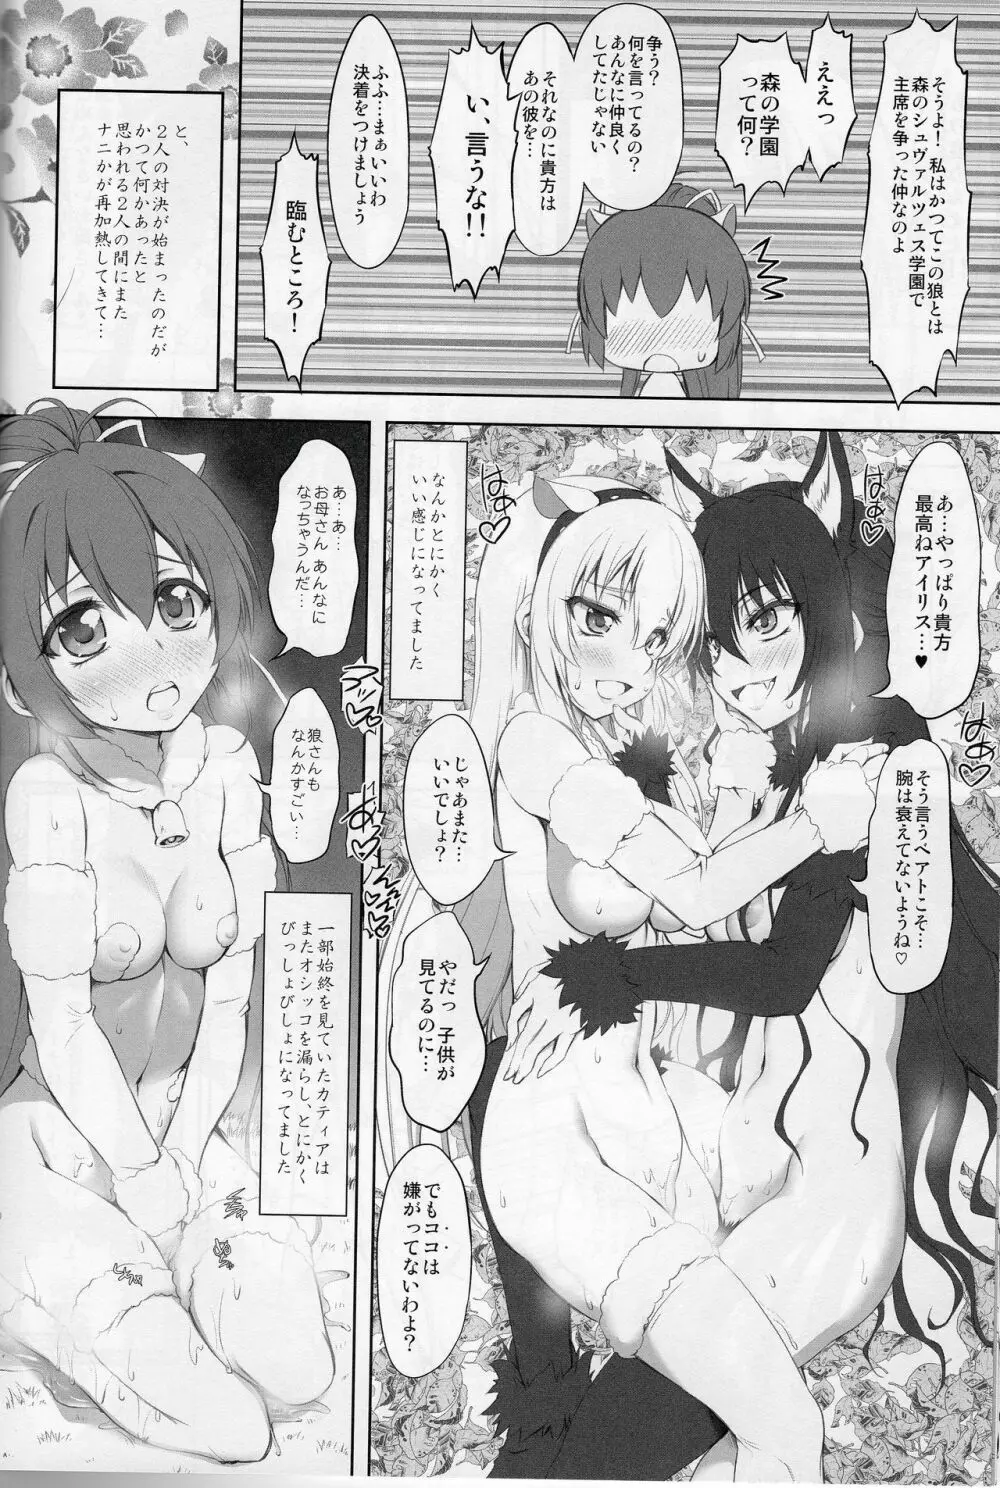 7Girls and wolf Page.23